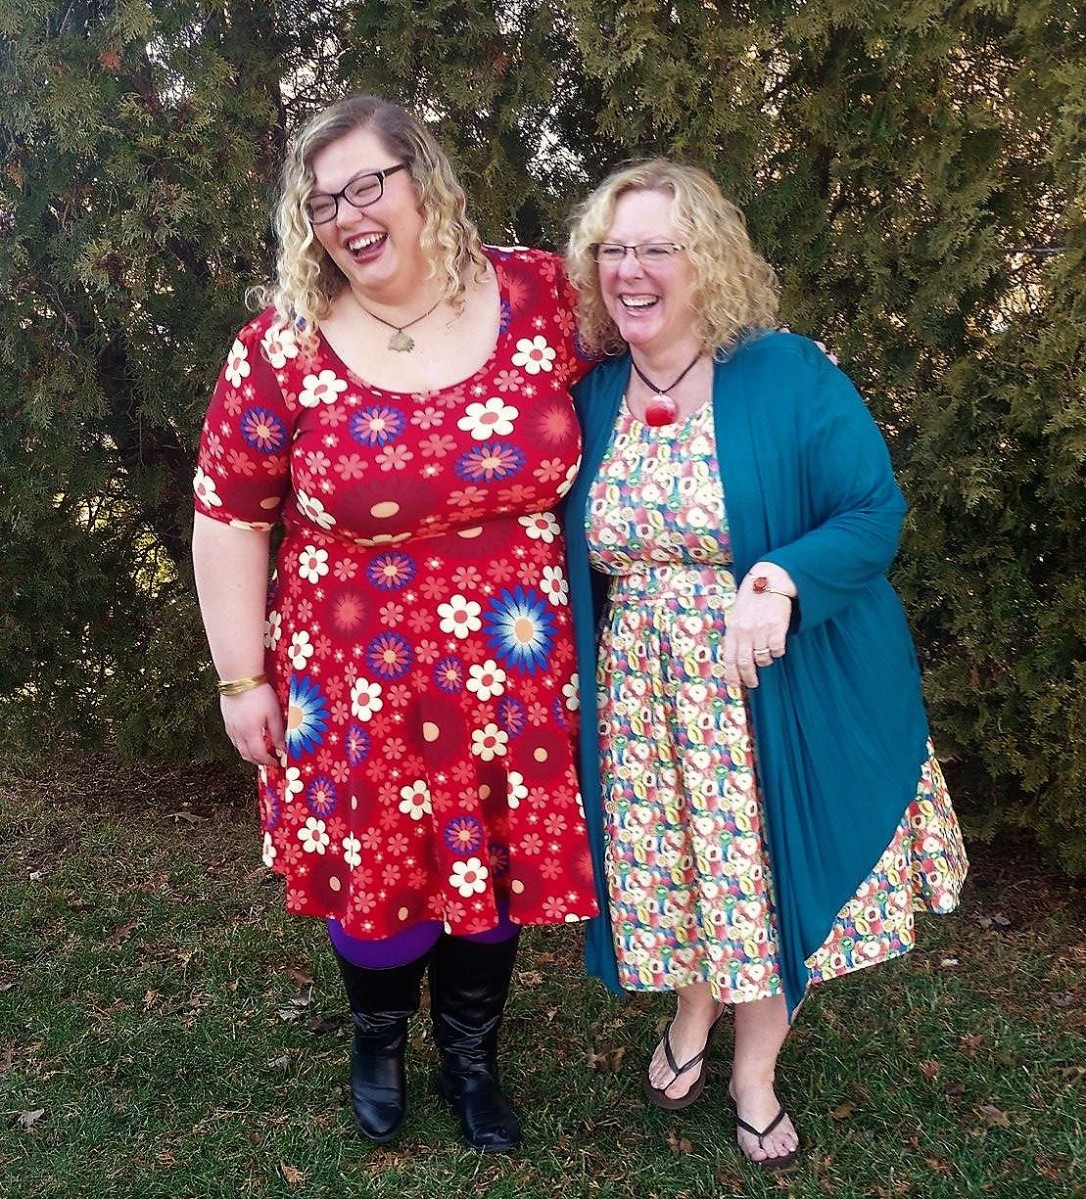 can we talk about how ugly lularoe is